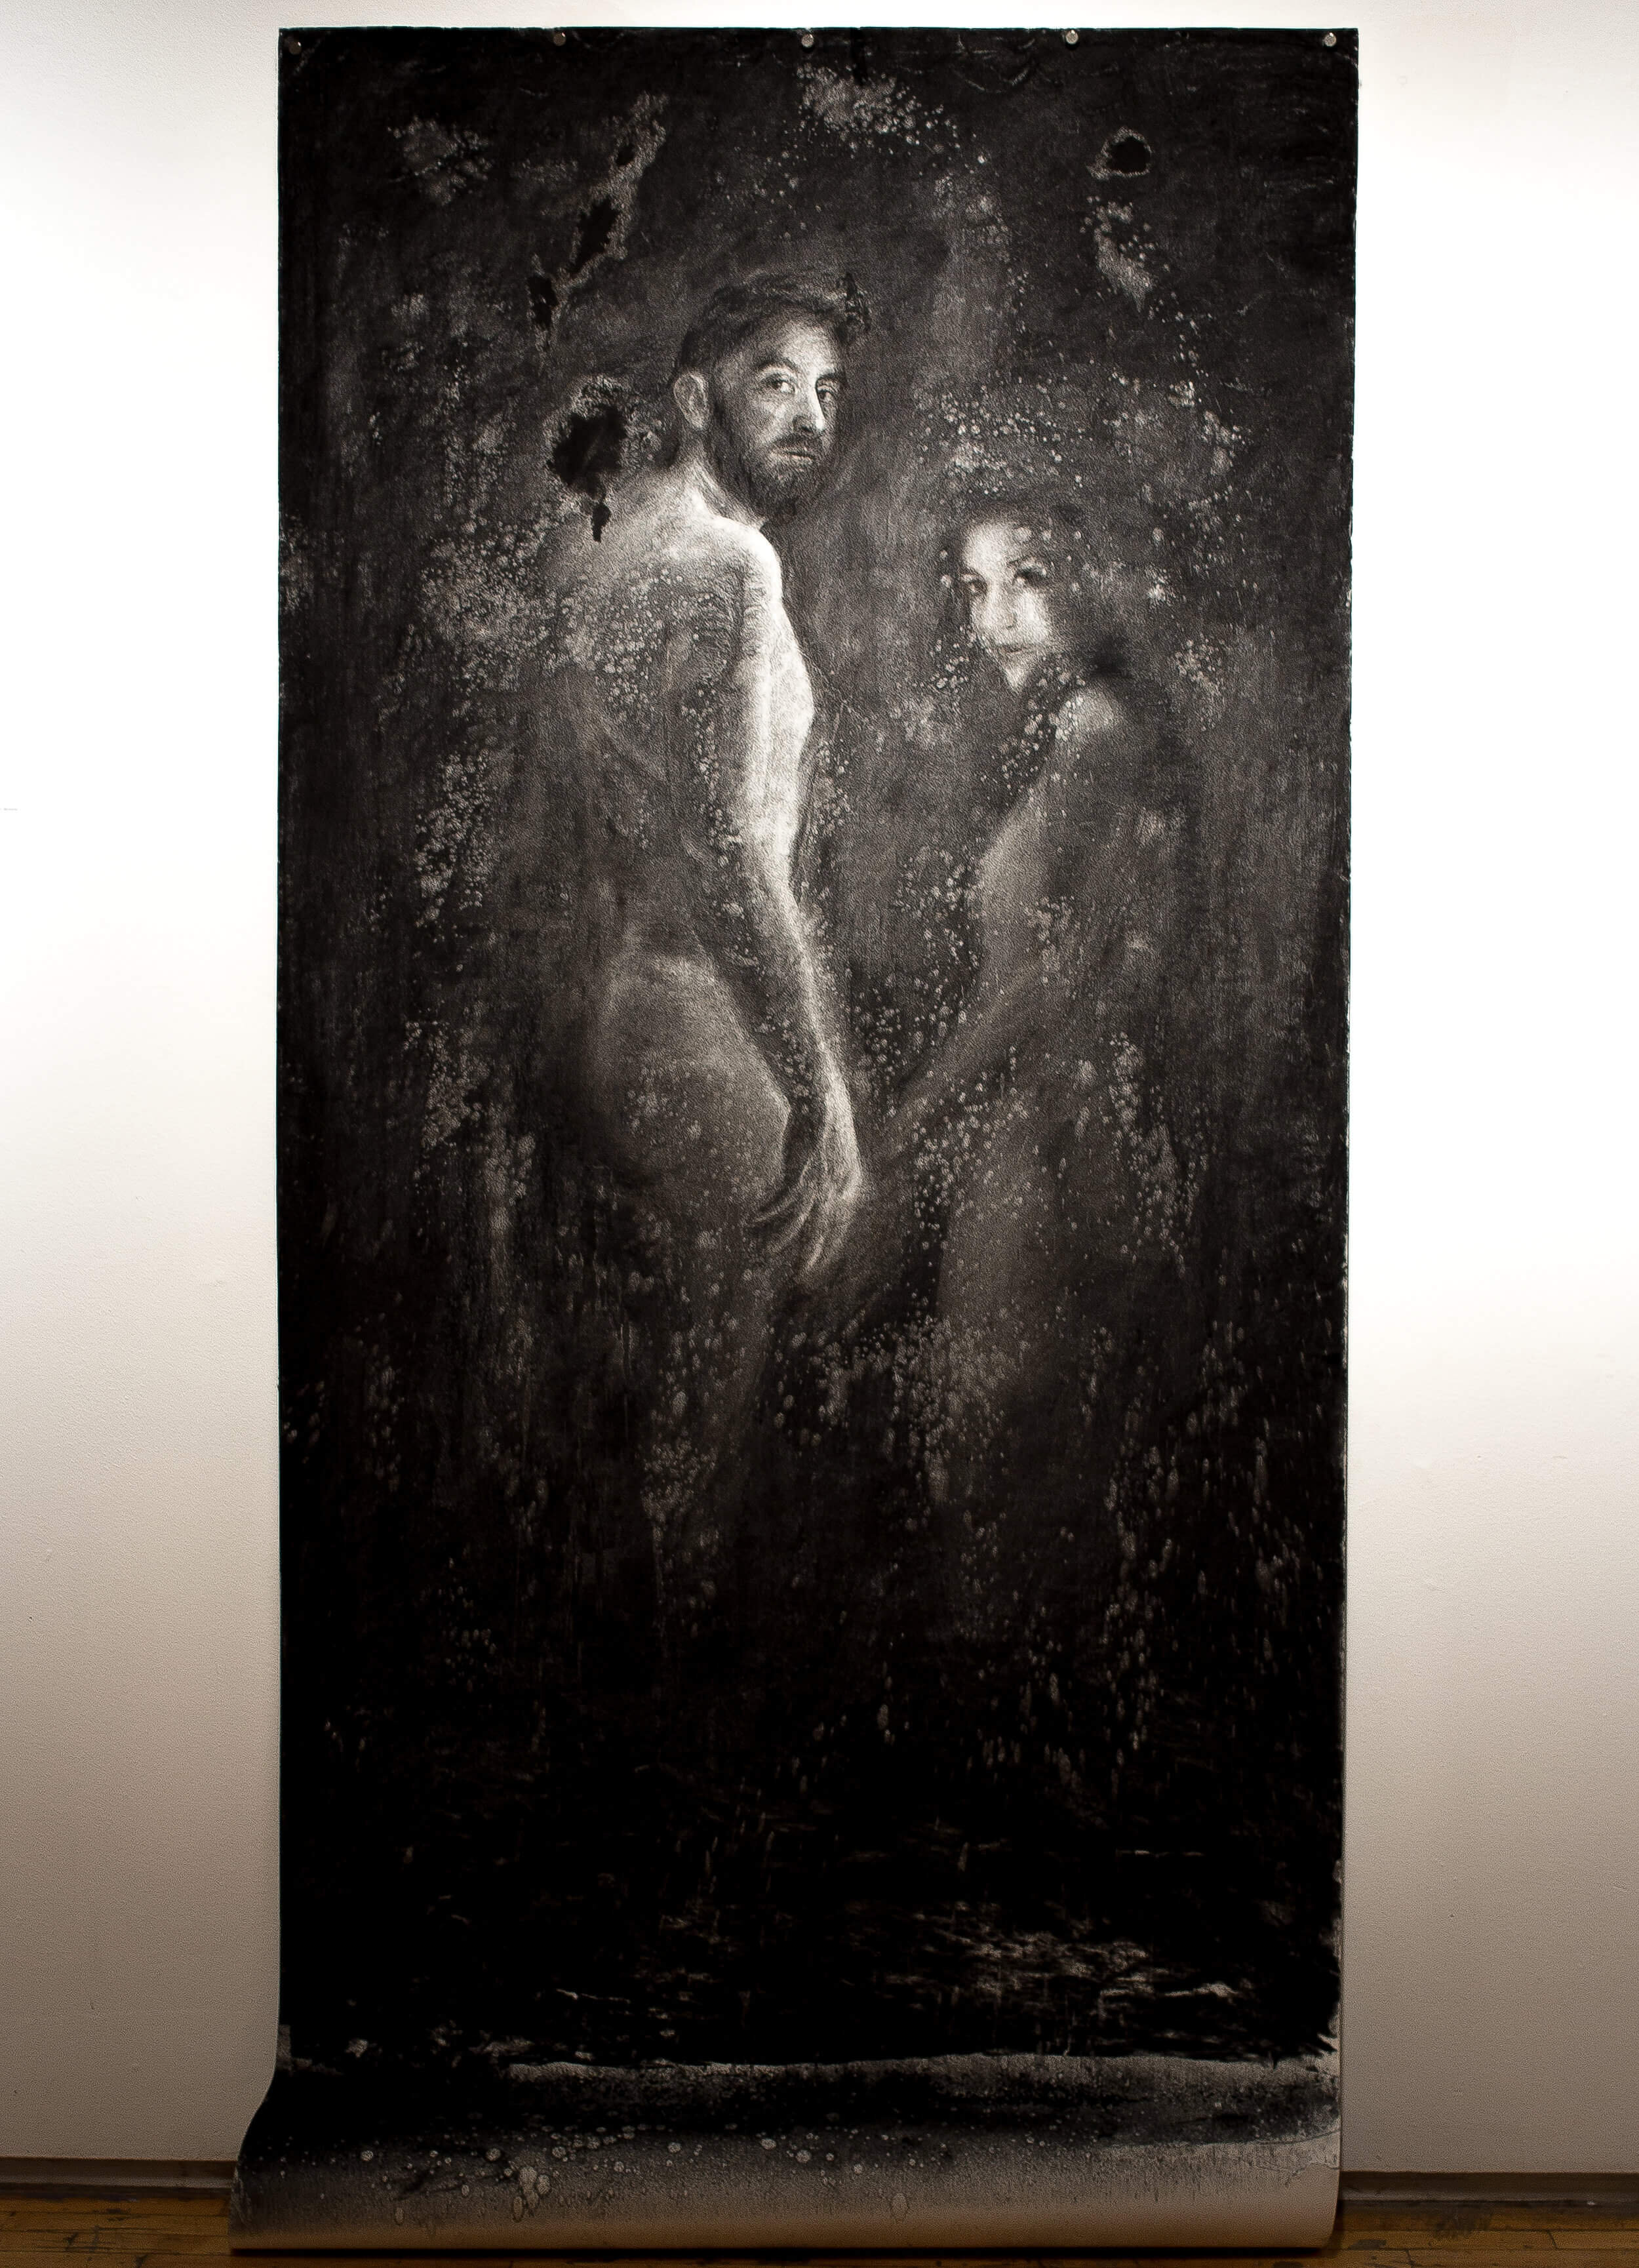 Ways to say hello, 3ft x 7ft (charcoal on paper) - 2018